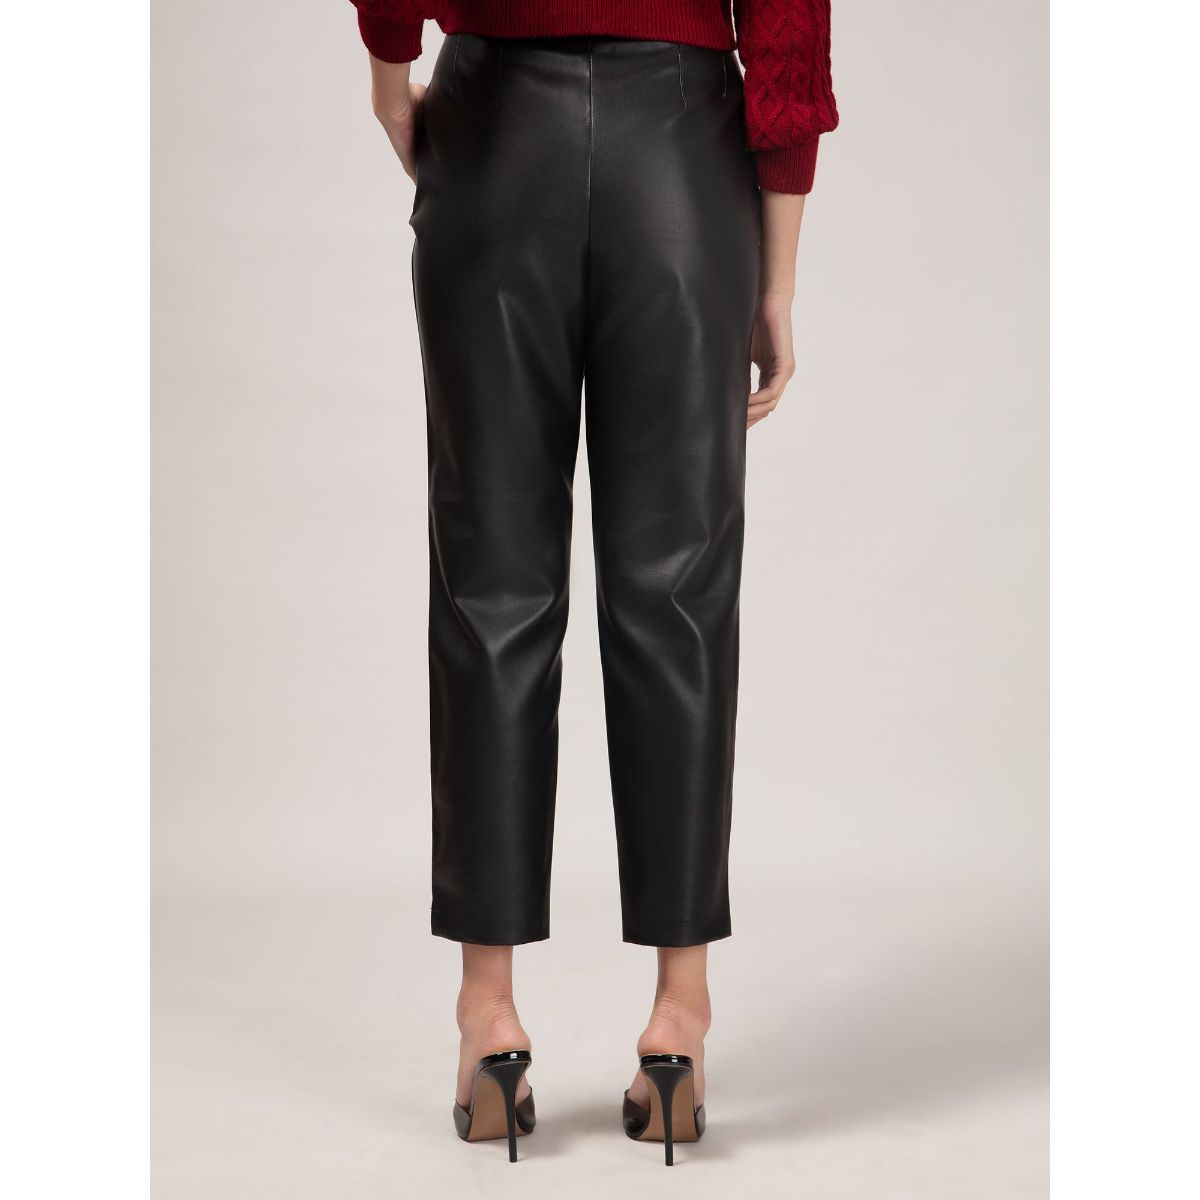 black high waist leather trousers